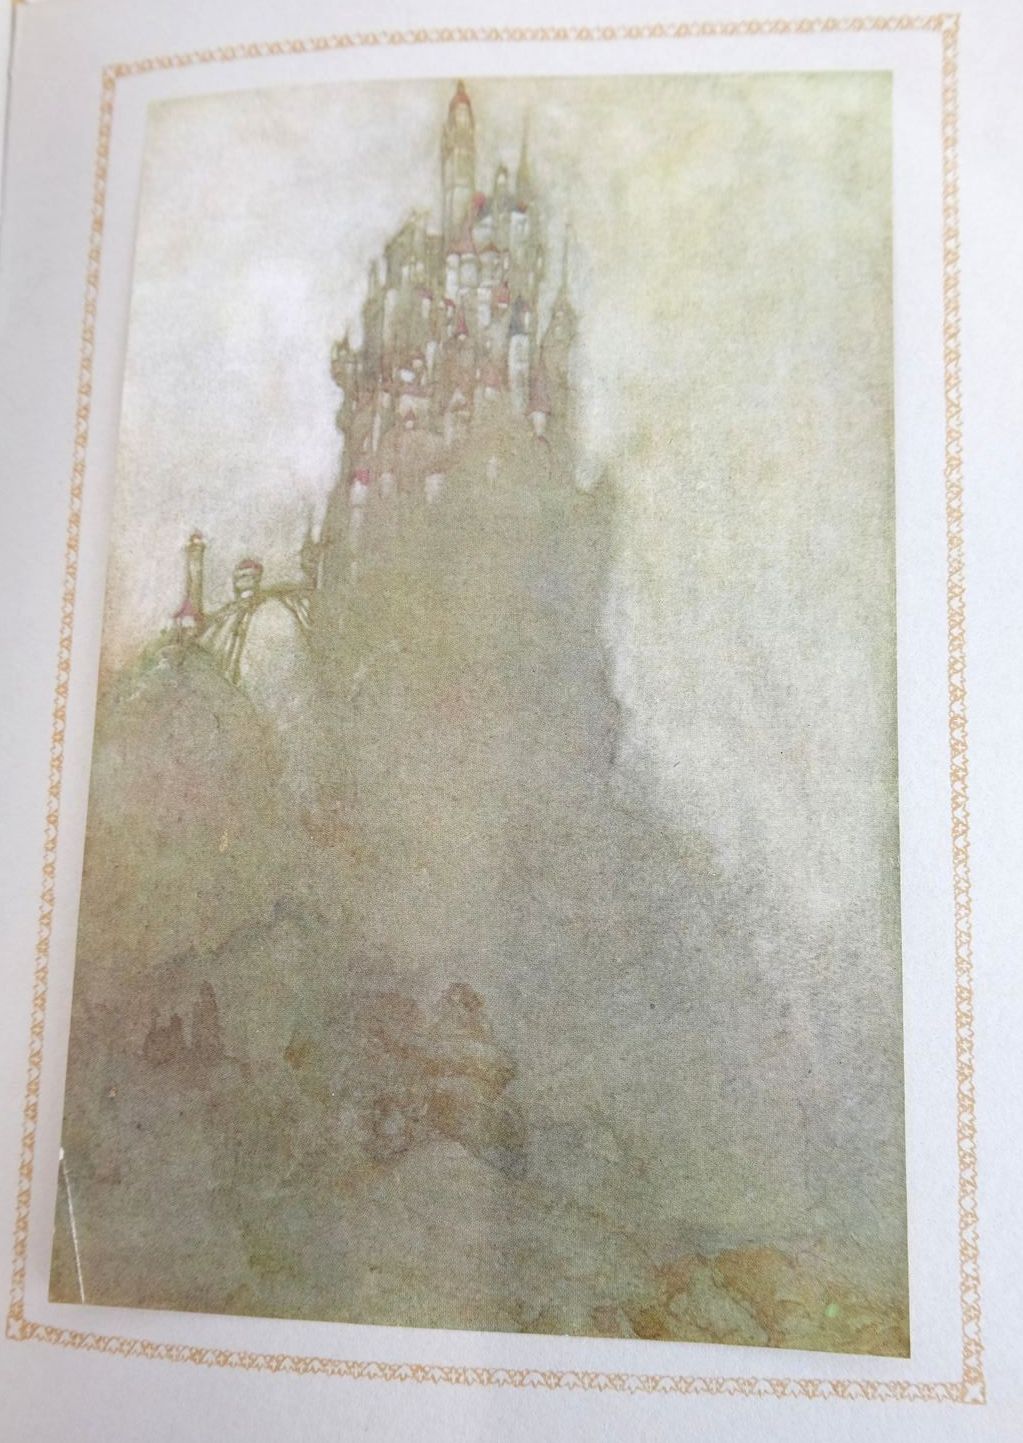 Photo of PARSIFAL written by Wagner, Richard
Rolleston, T.W. illustrated by Pogany, Willy published by Harrap & Co (STOCK CODE: 1323508)  for sale by Stella & Rose's Books